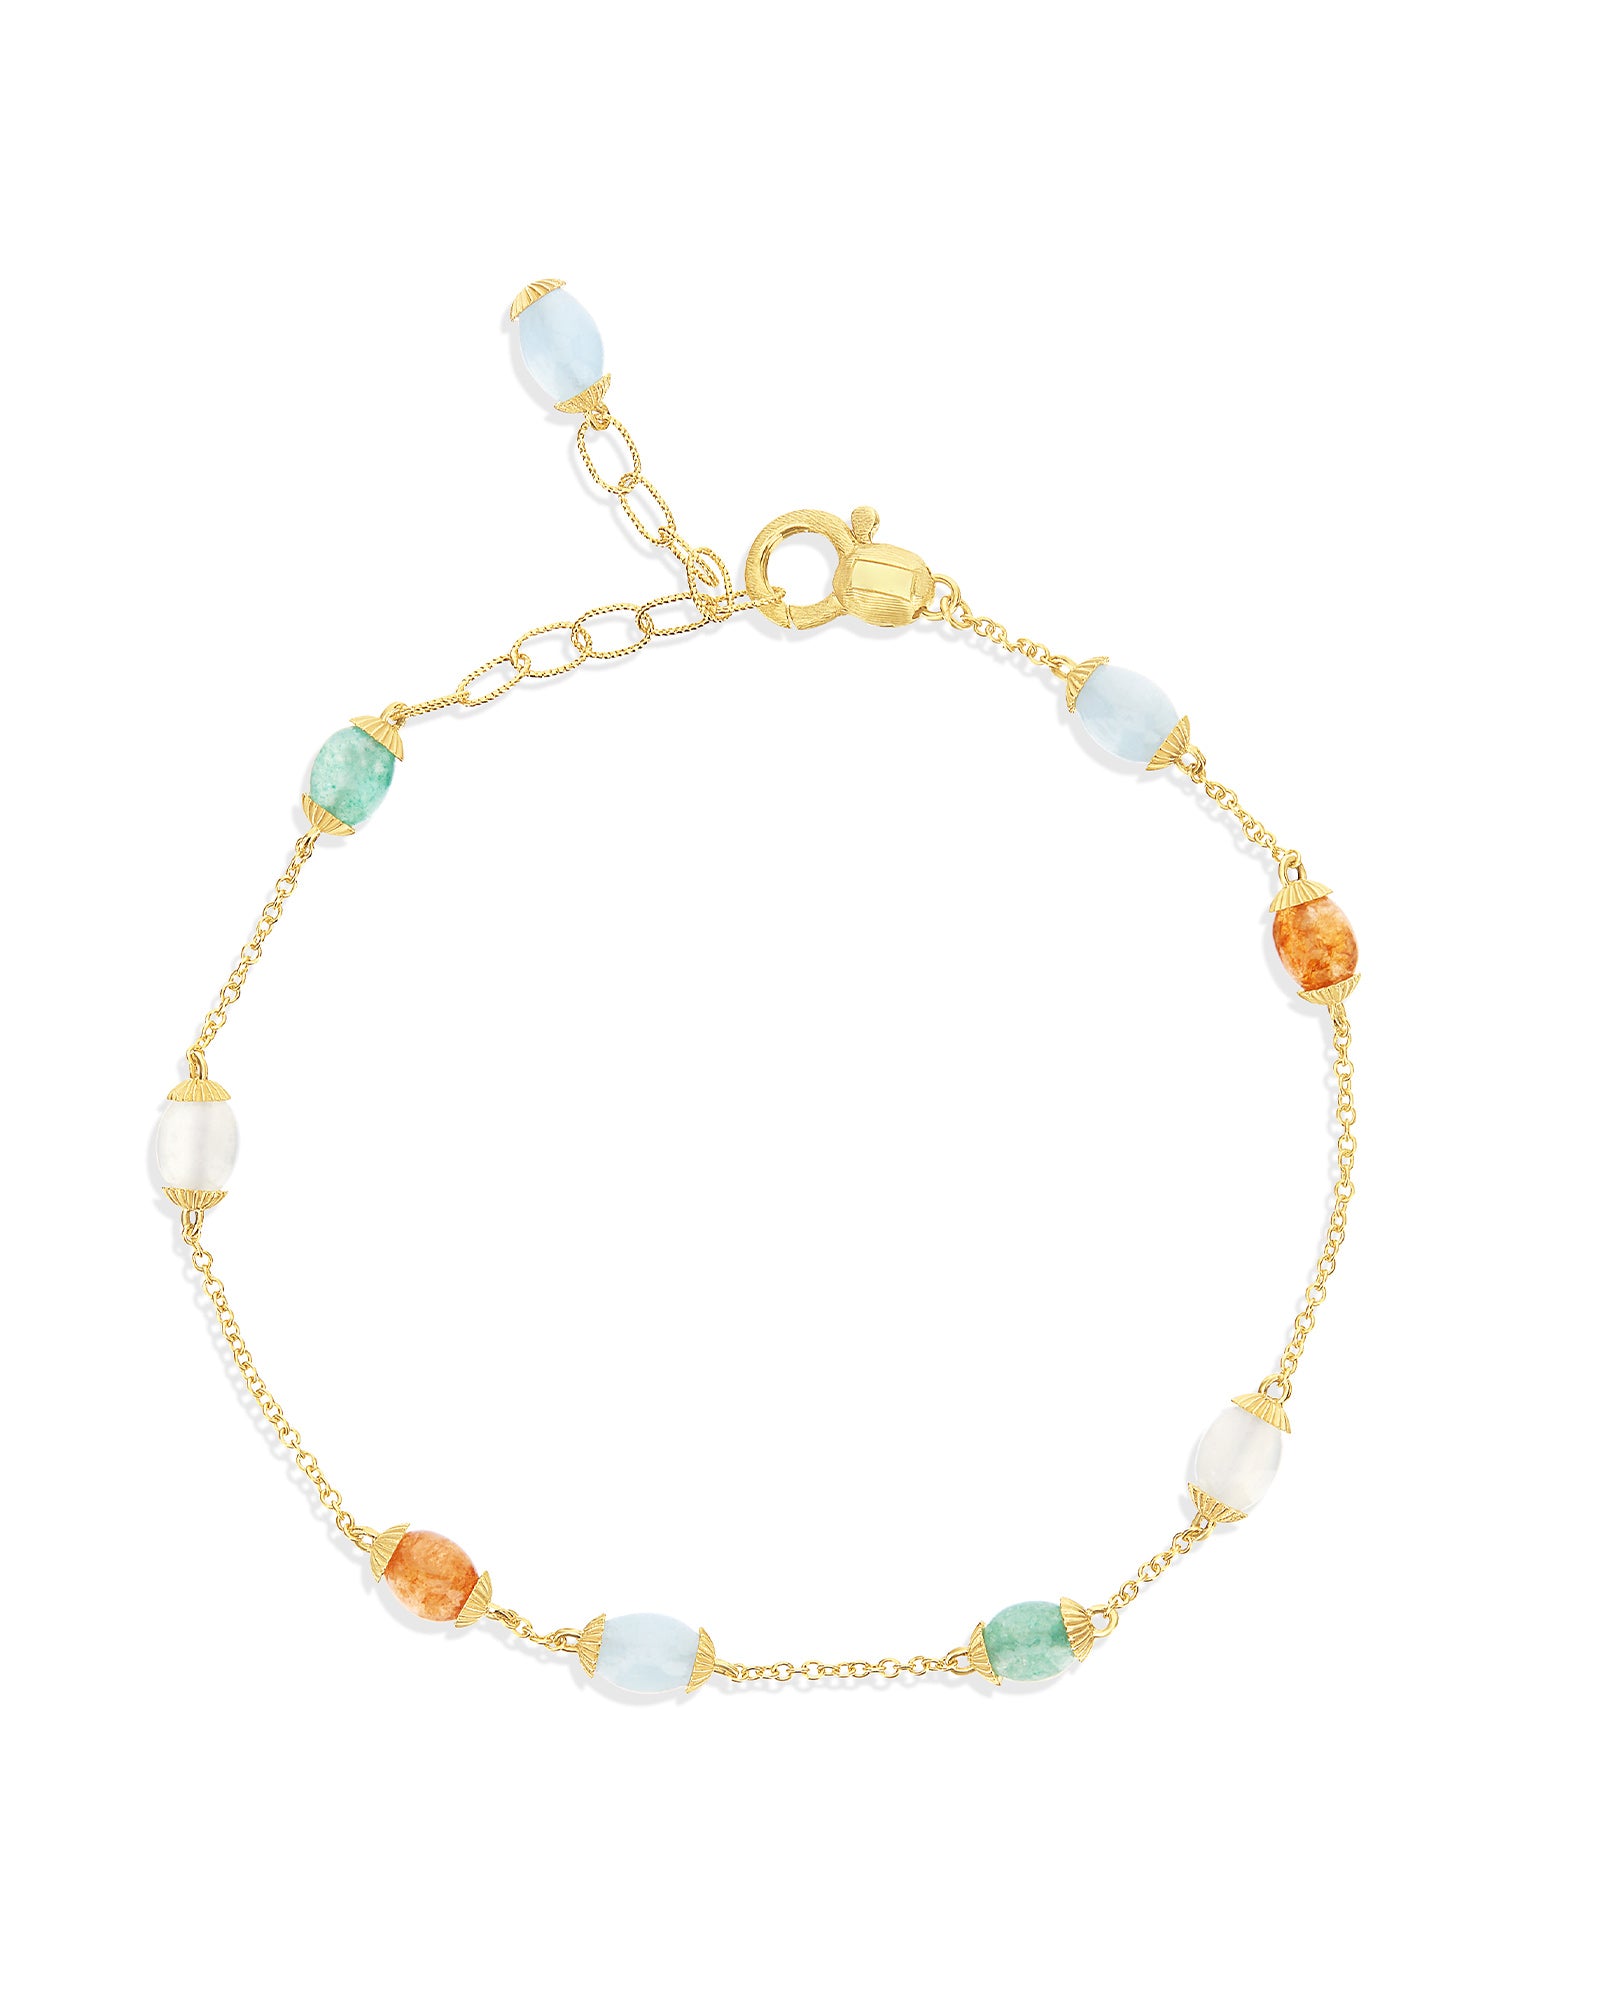 Rainbow "Amulets" Gold and Natural Stones Bracelet